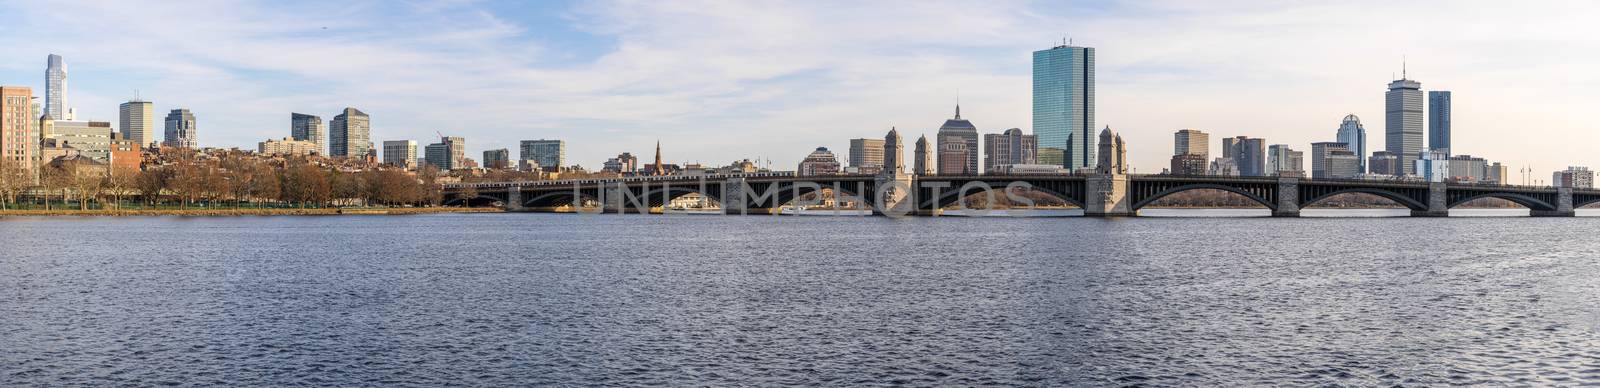 Panorama over of The Longfellow Bridge over the charles river at the evening time which have traing running, USA downtown skyline, Architecture and building with transportation concept